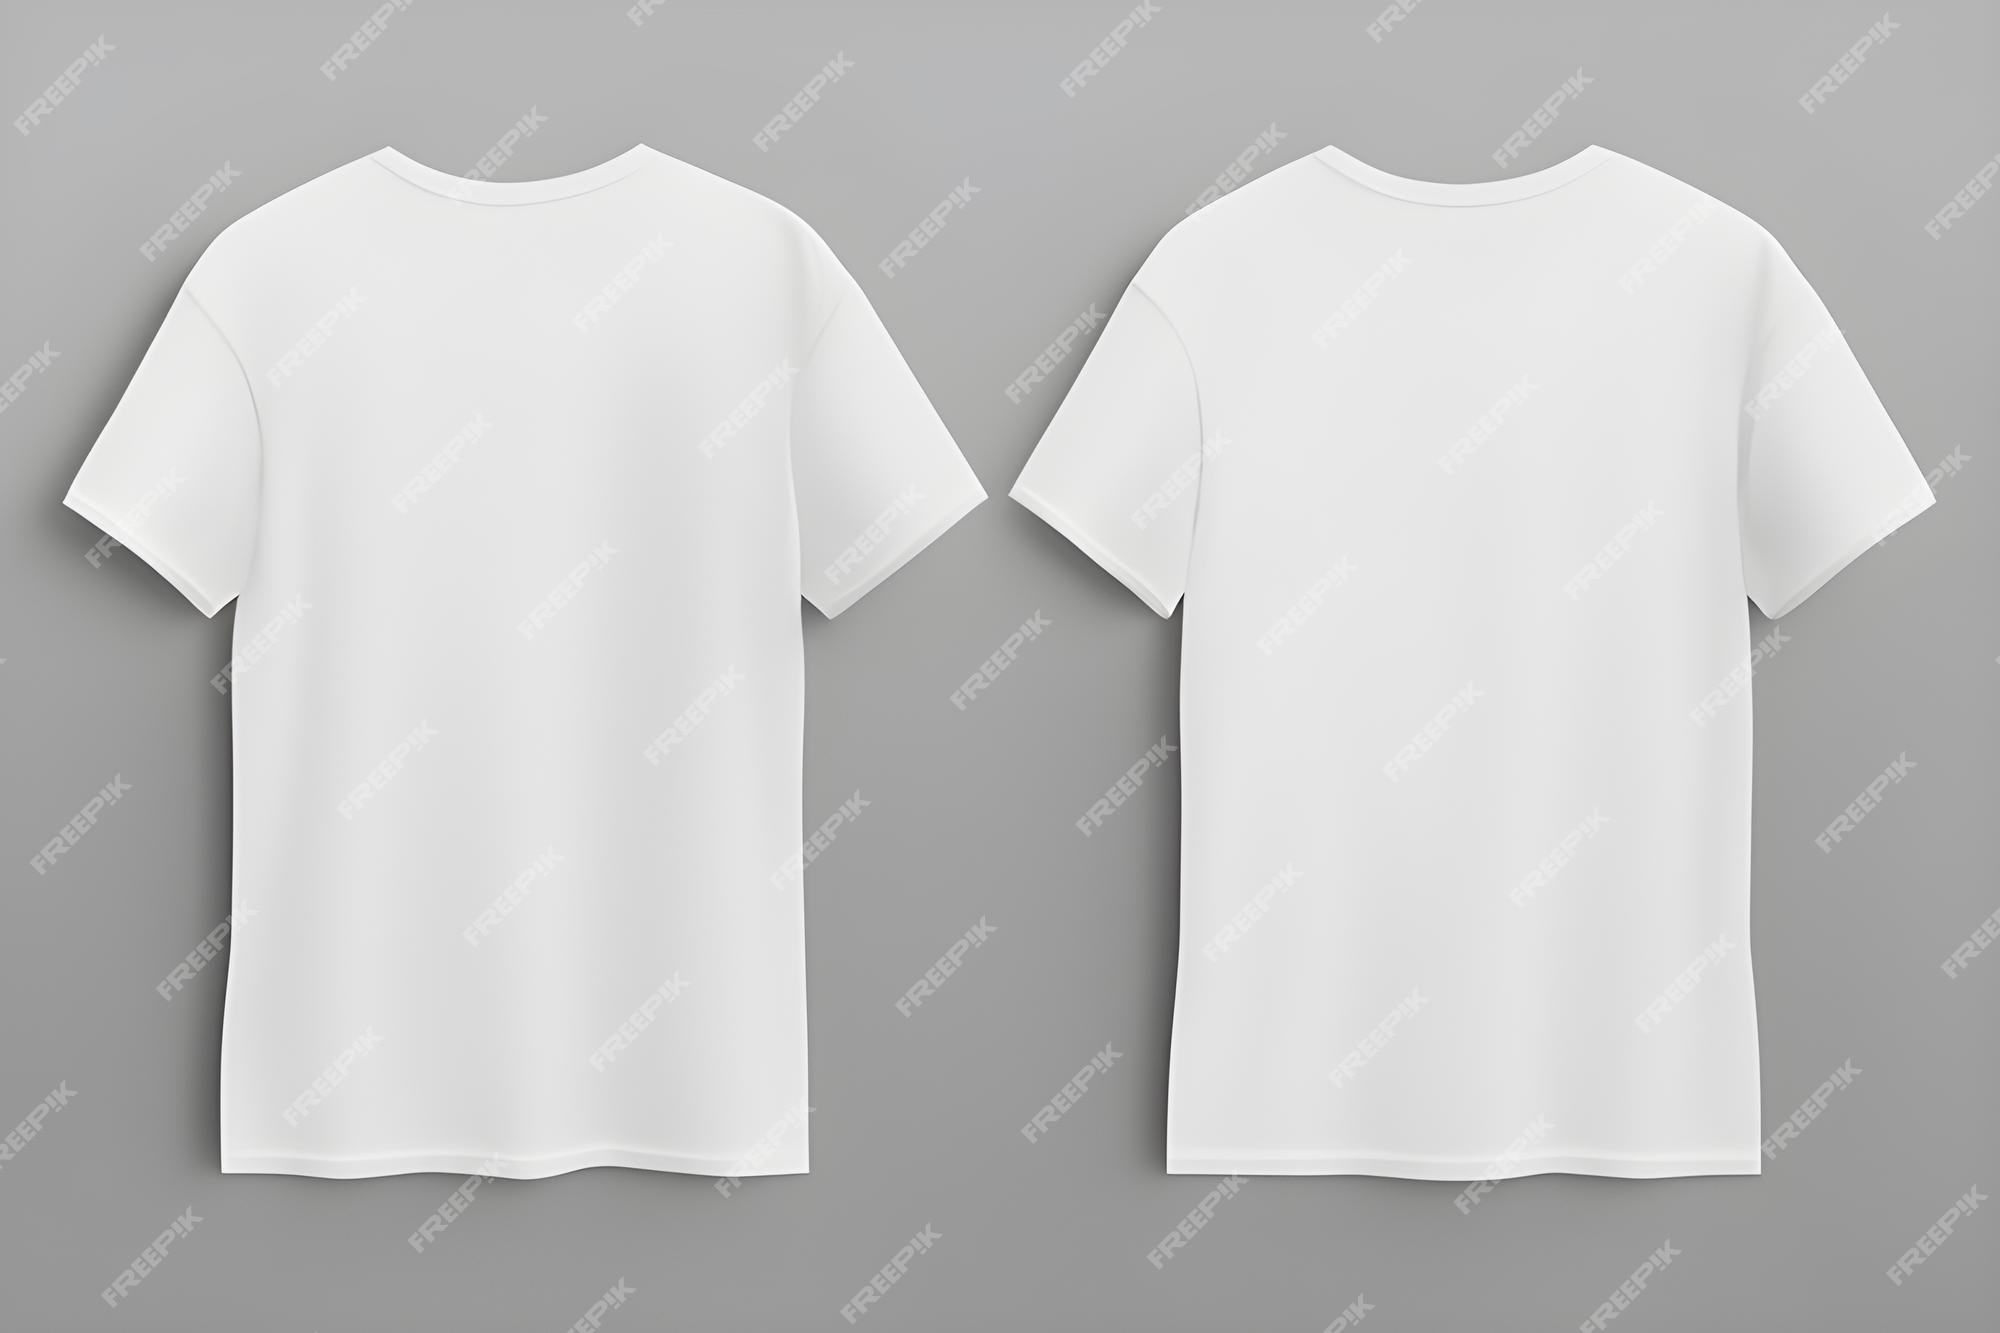 Blank T Shirt Images - Free Download on